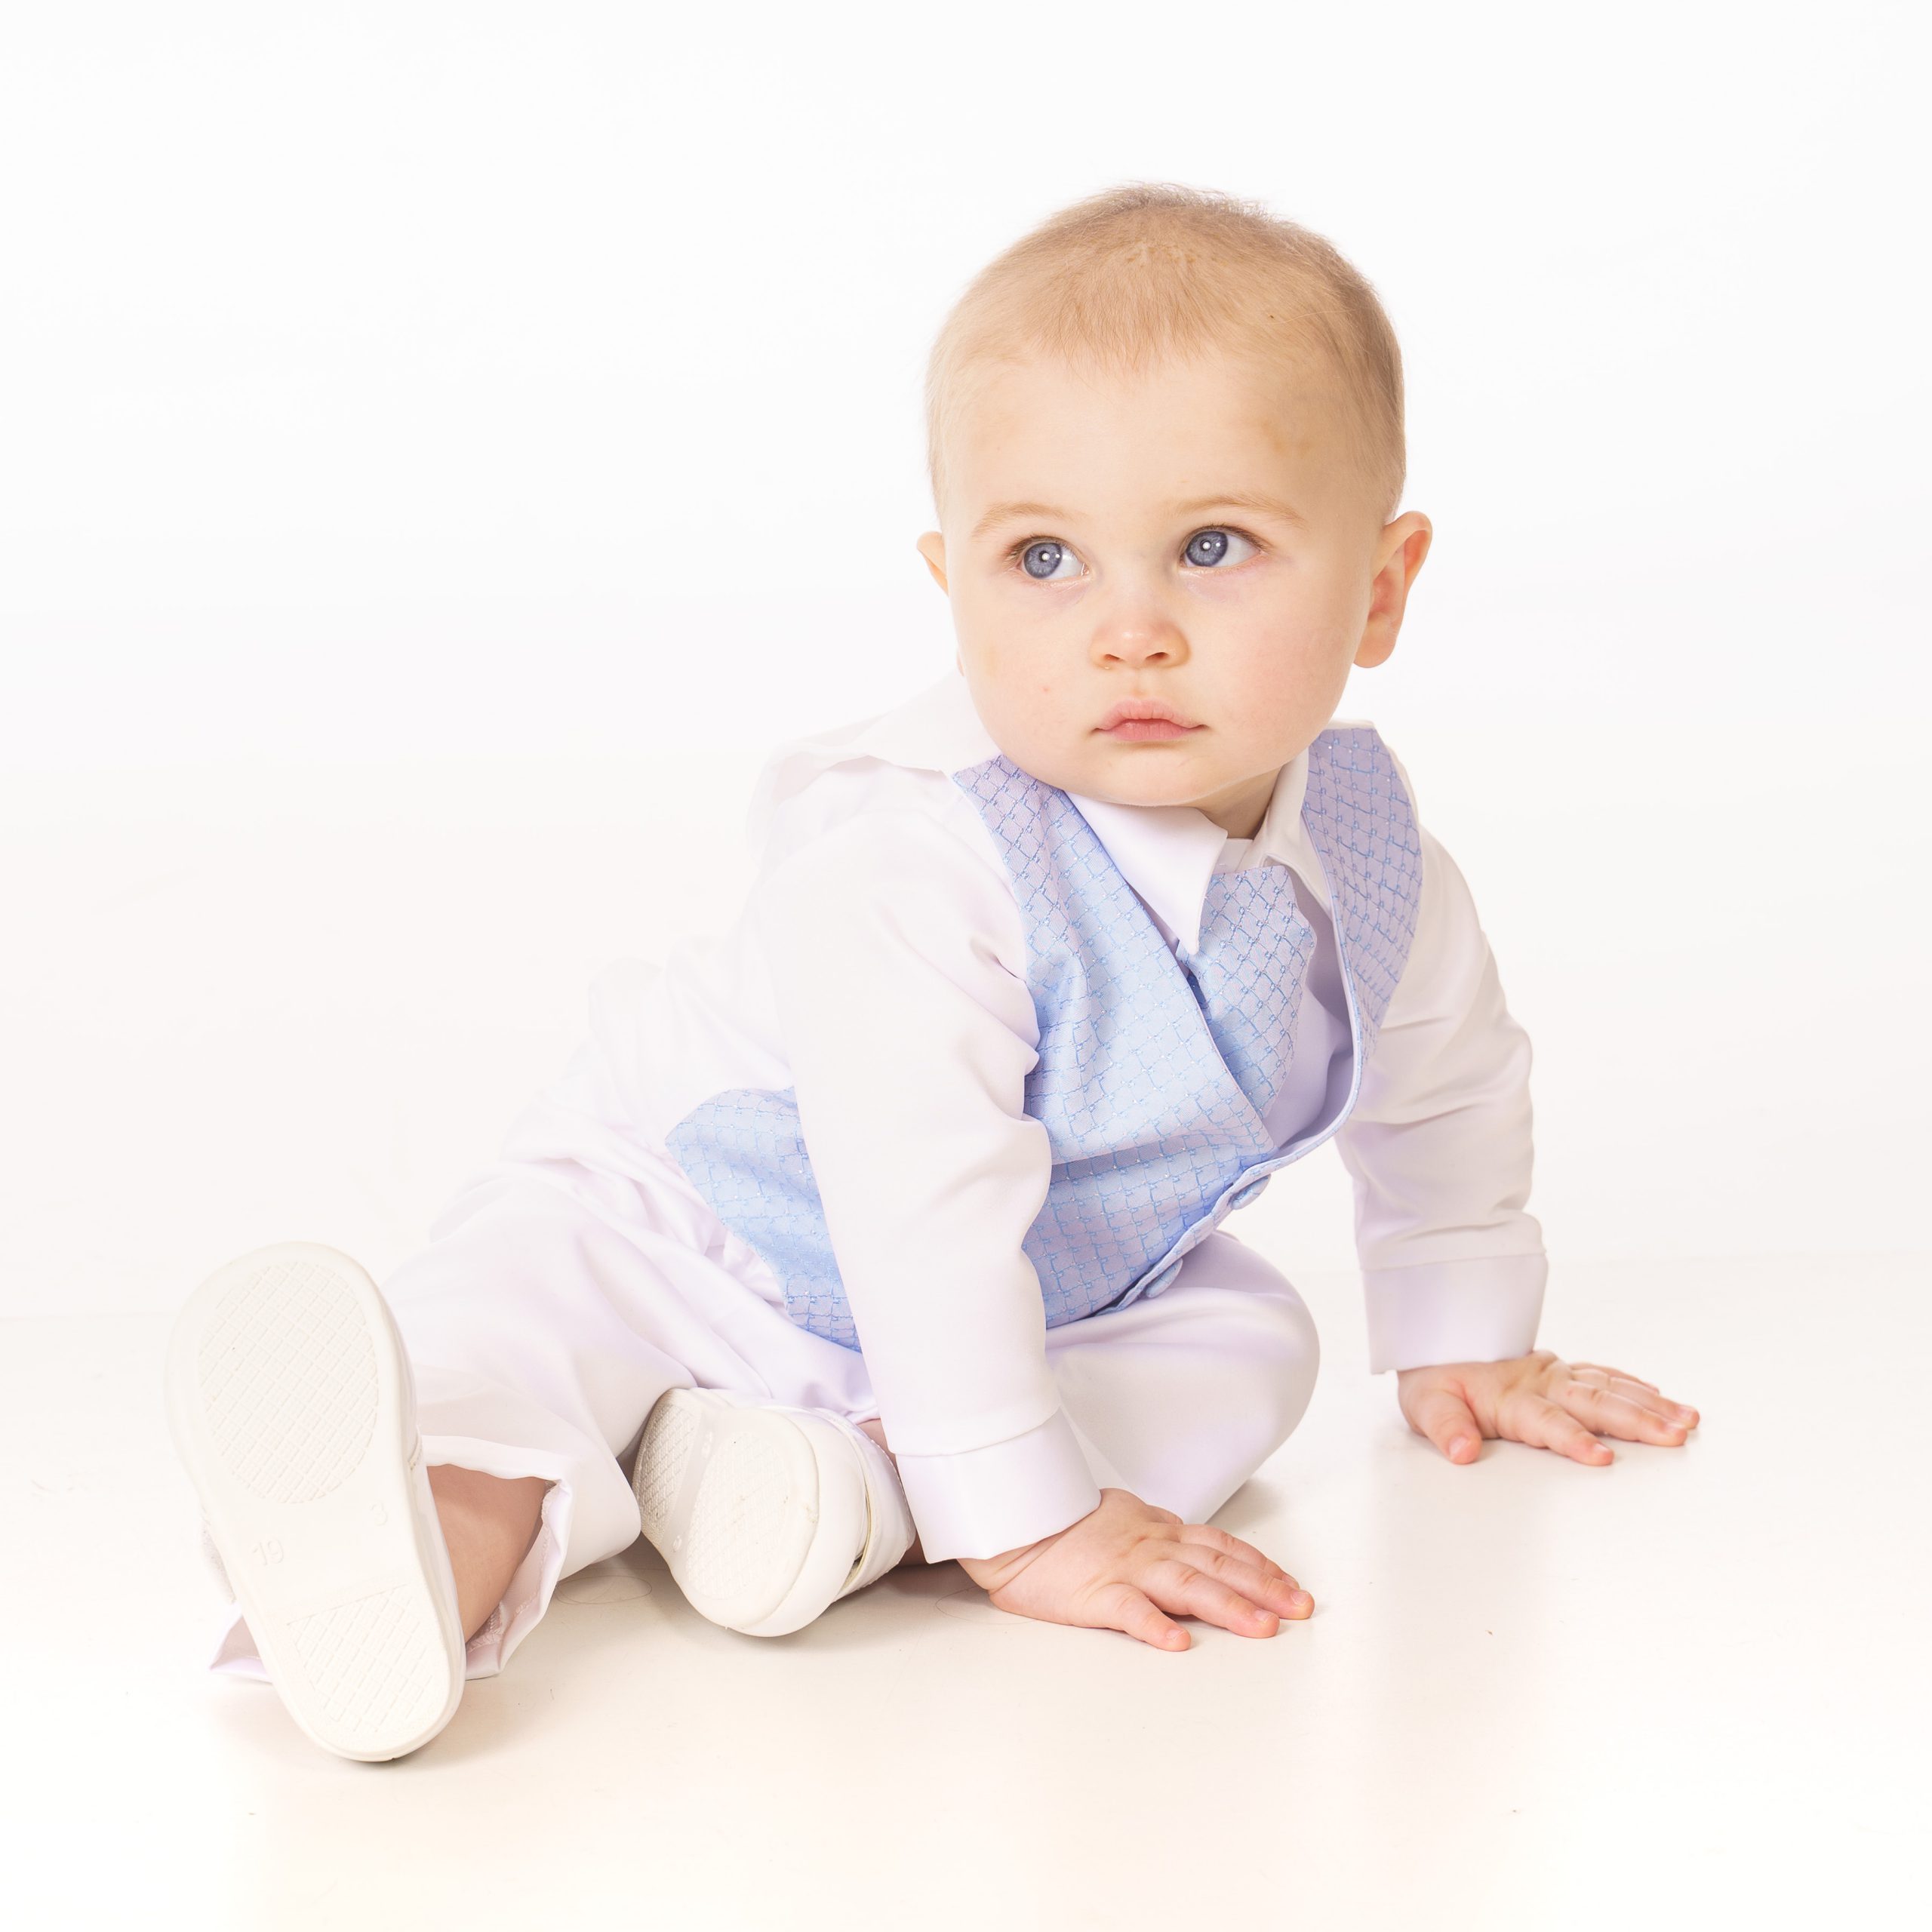 4 Piece Christening Suit in Blue new – Occasionwear for Kids